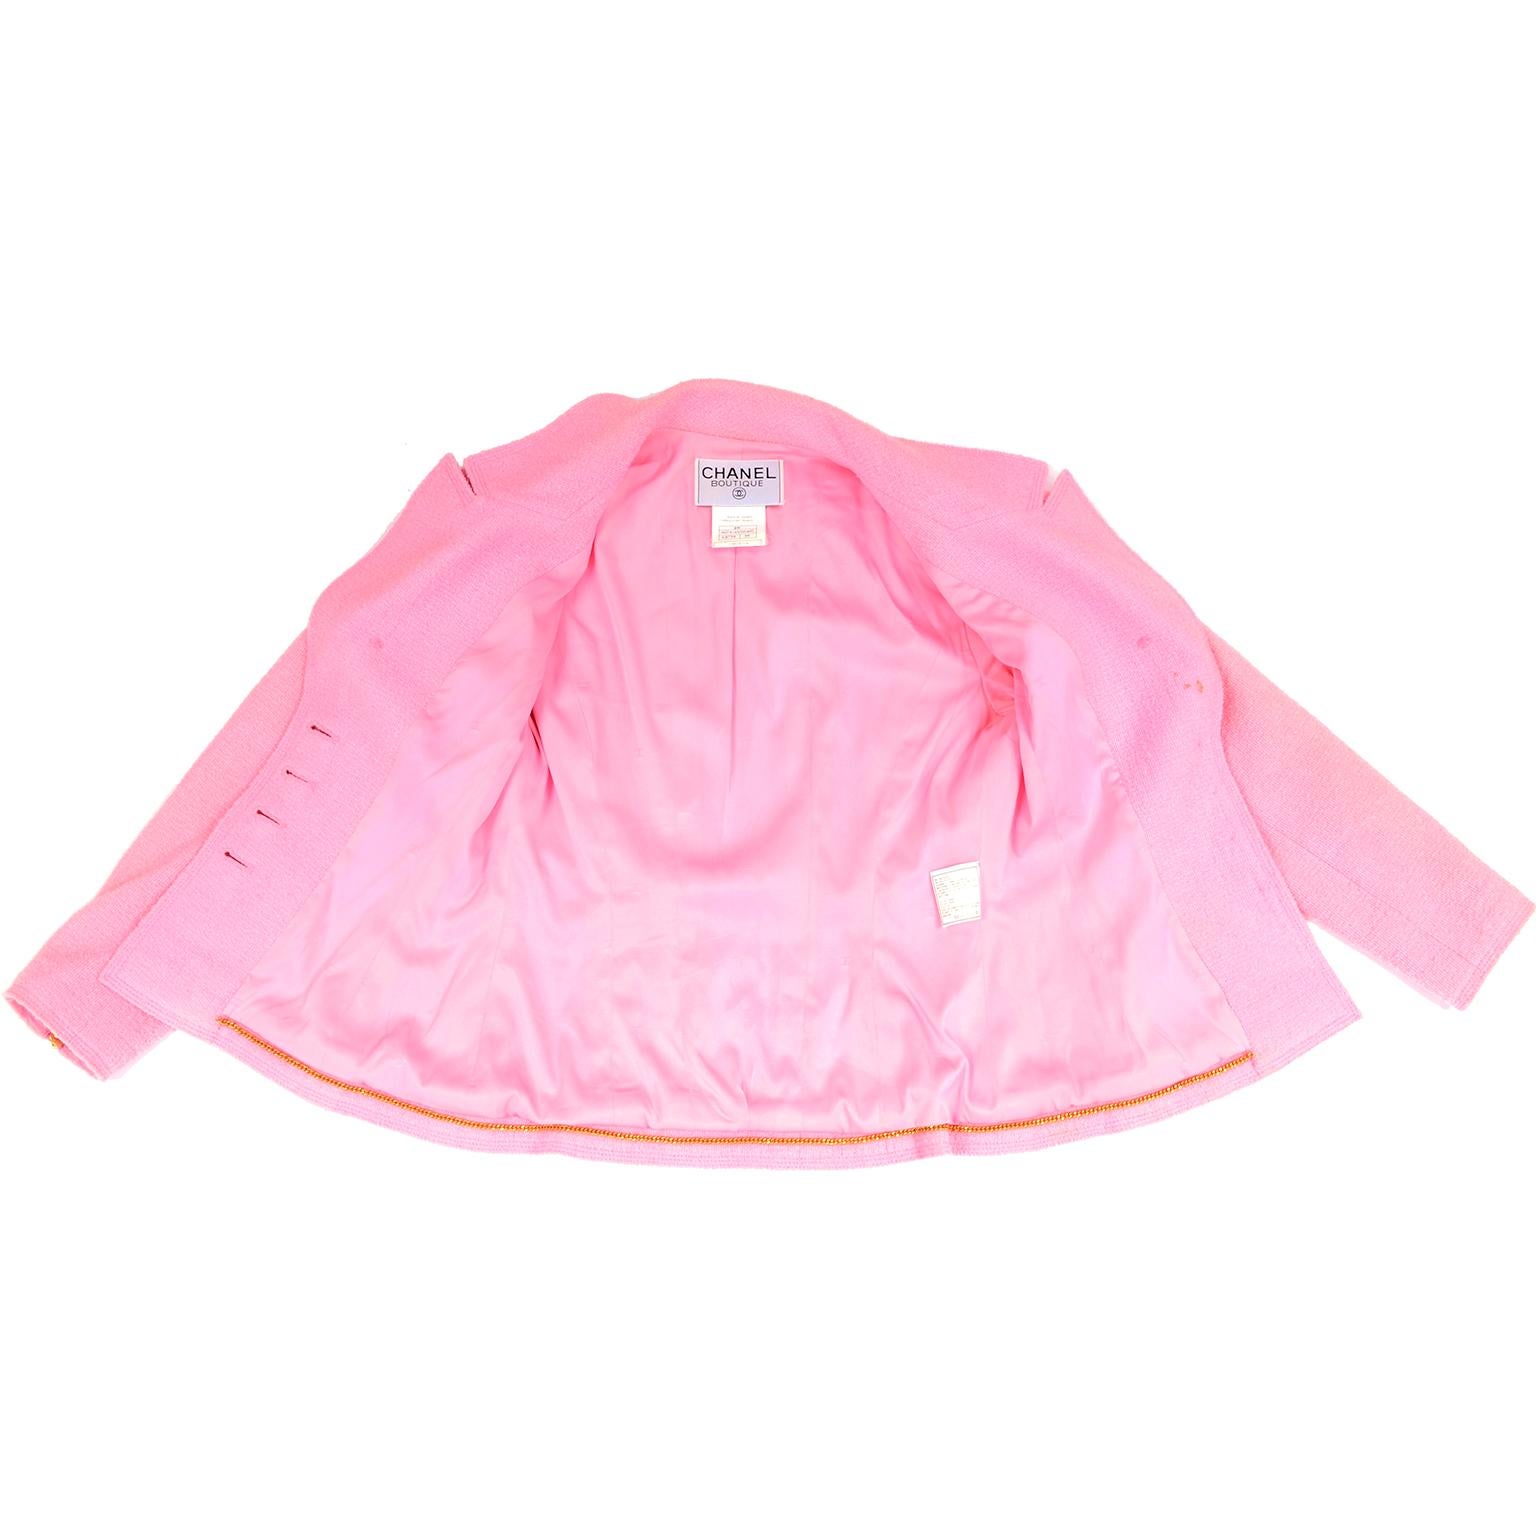 Spring 1997 Vintage Chanel Boucle Jacket in Bubble Gum Pink  5